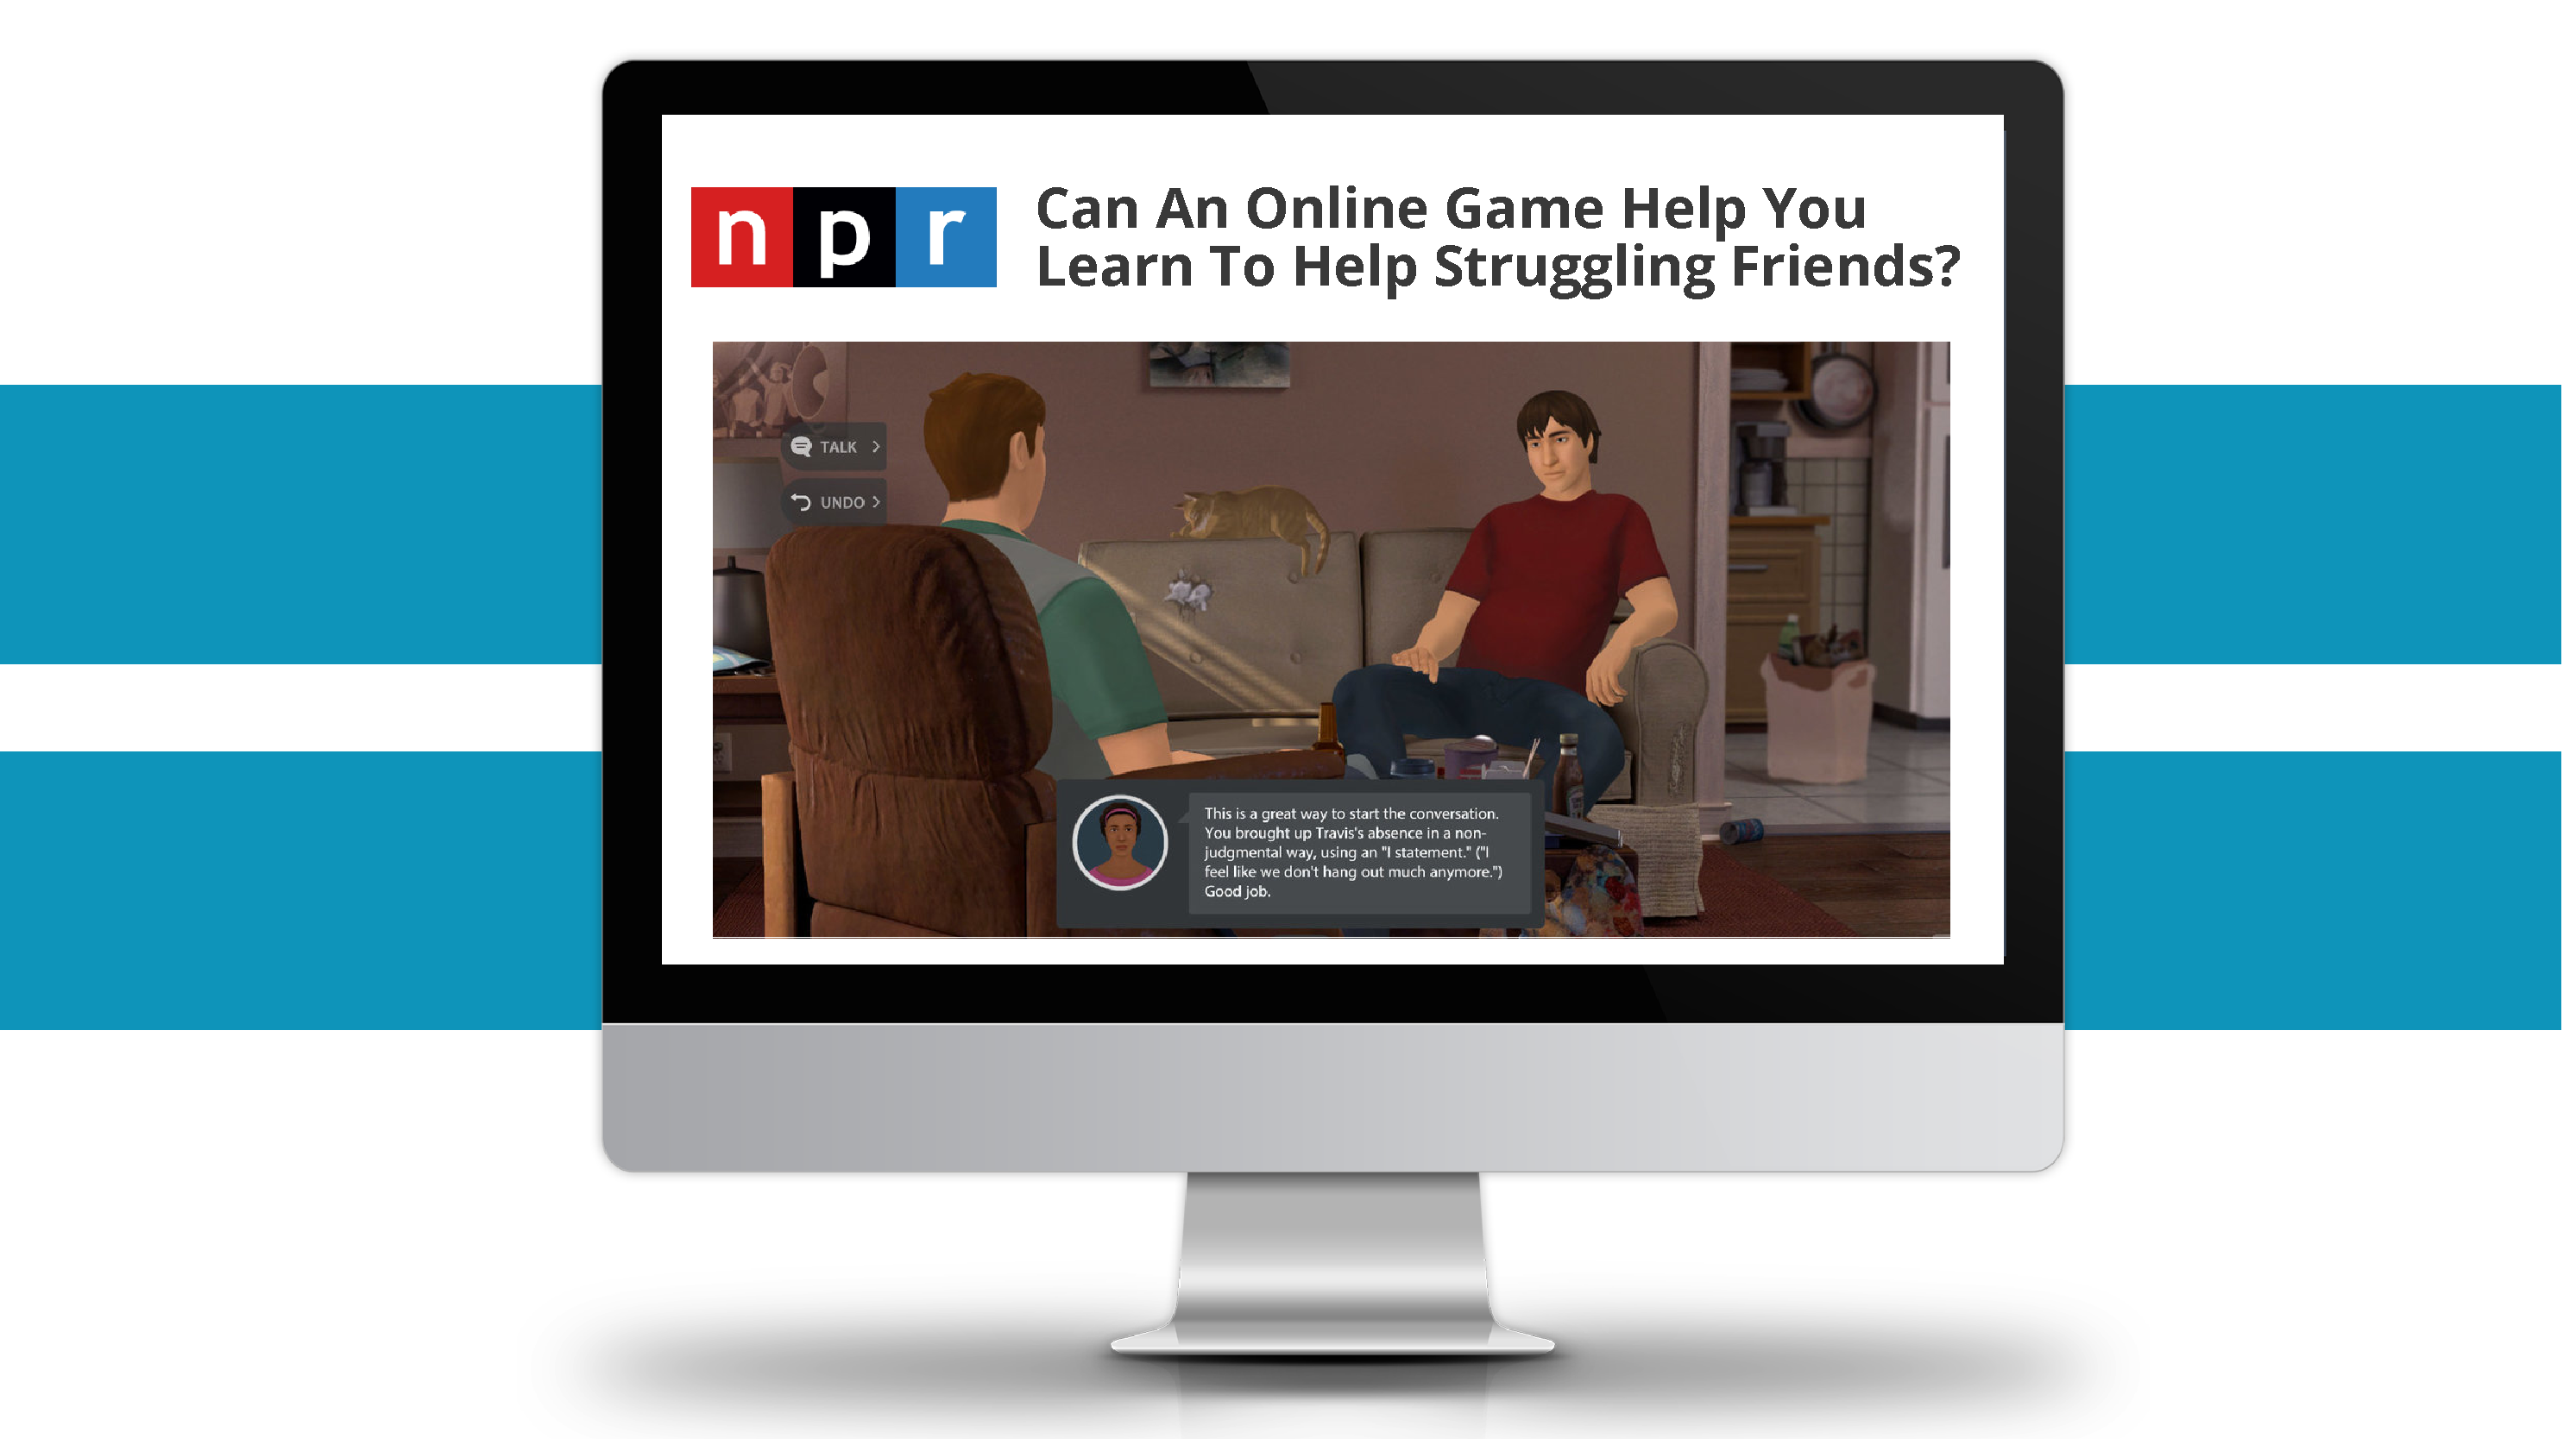 Can An Online Game Help You Learn To Help Struggling Friends?